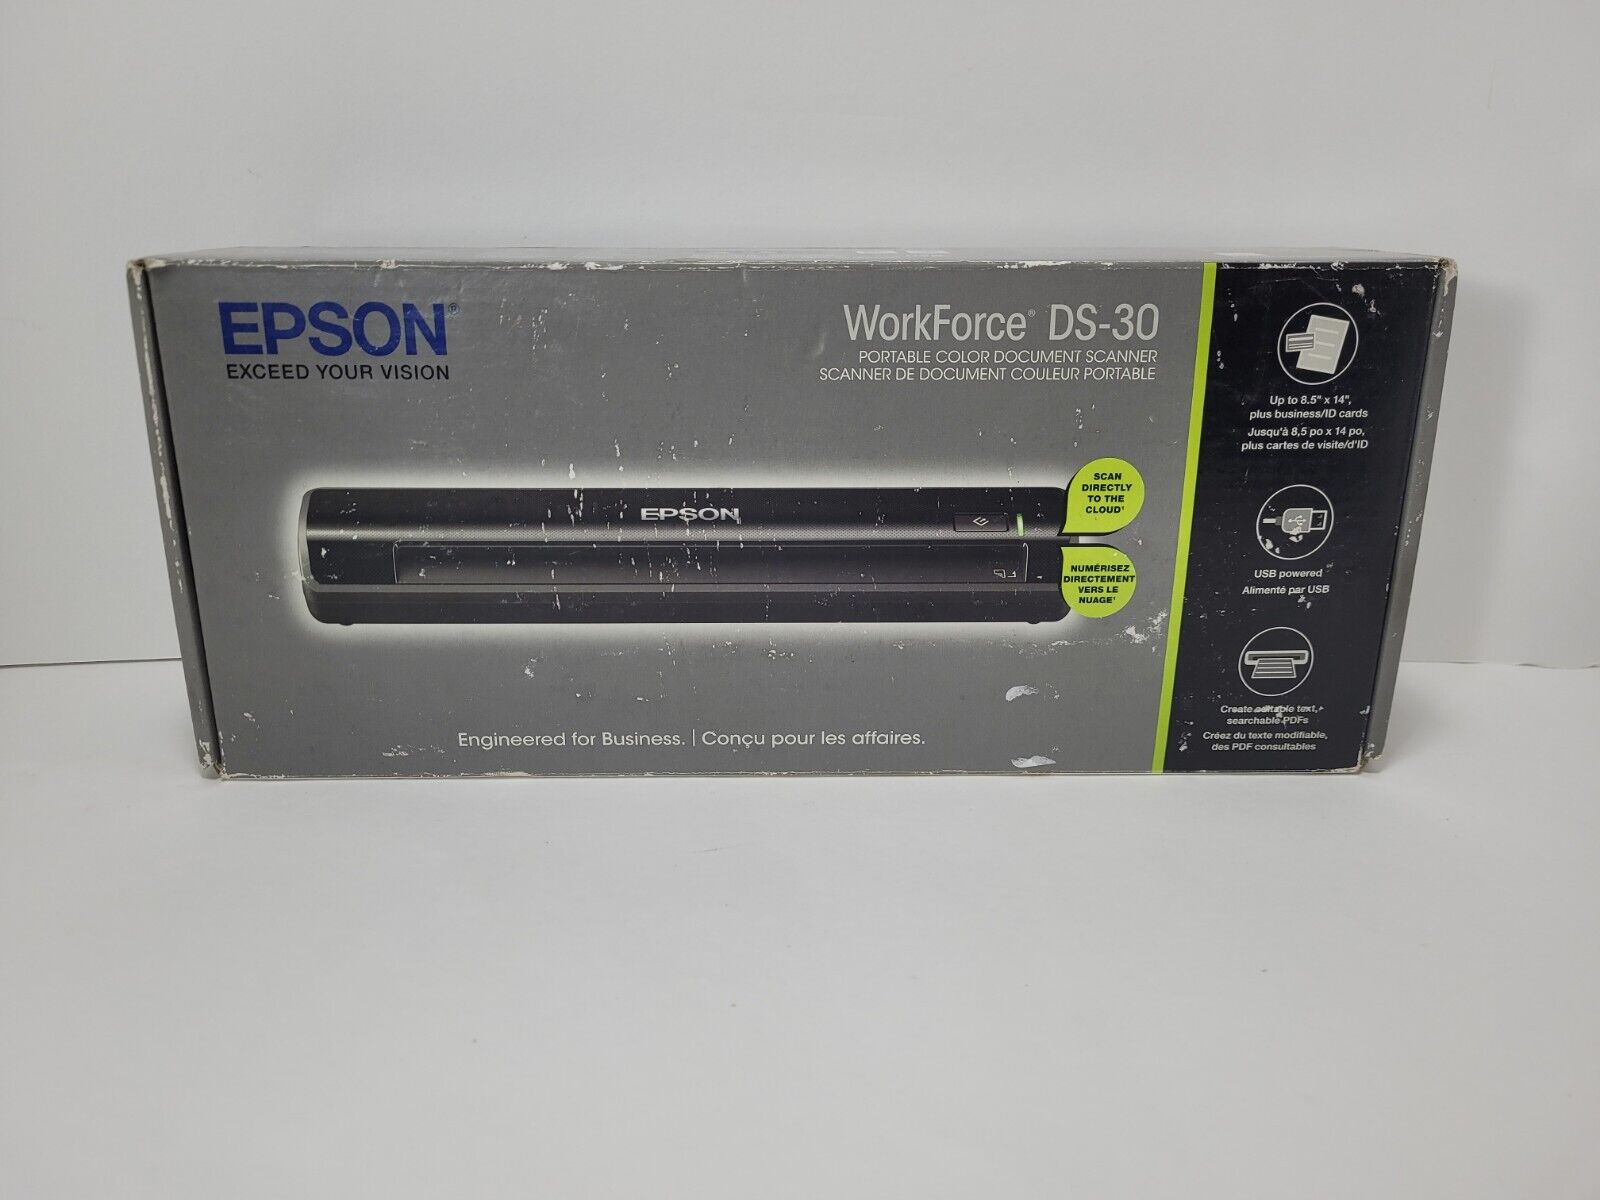 NEW Epson WorkForce DS-30 Portable Color Document Scanner IN BOX